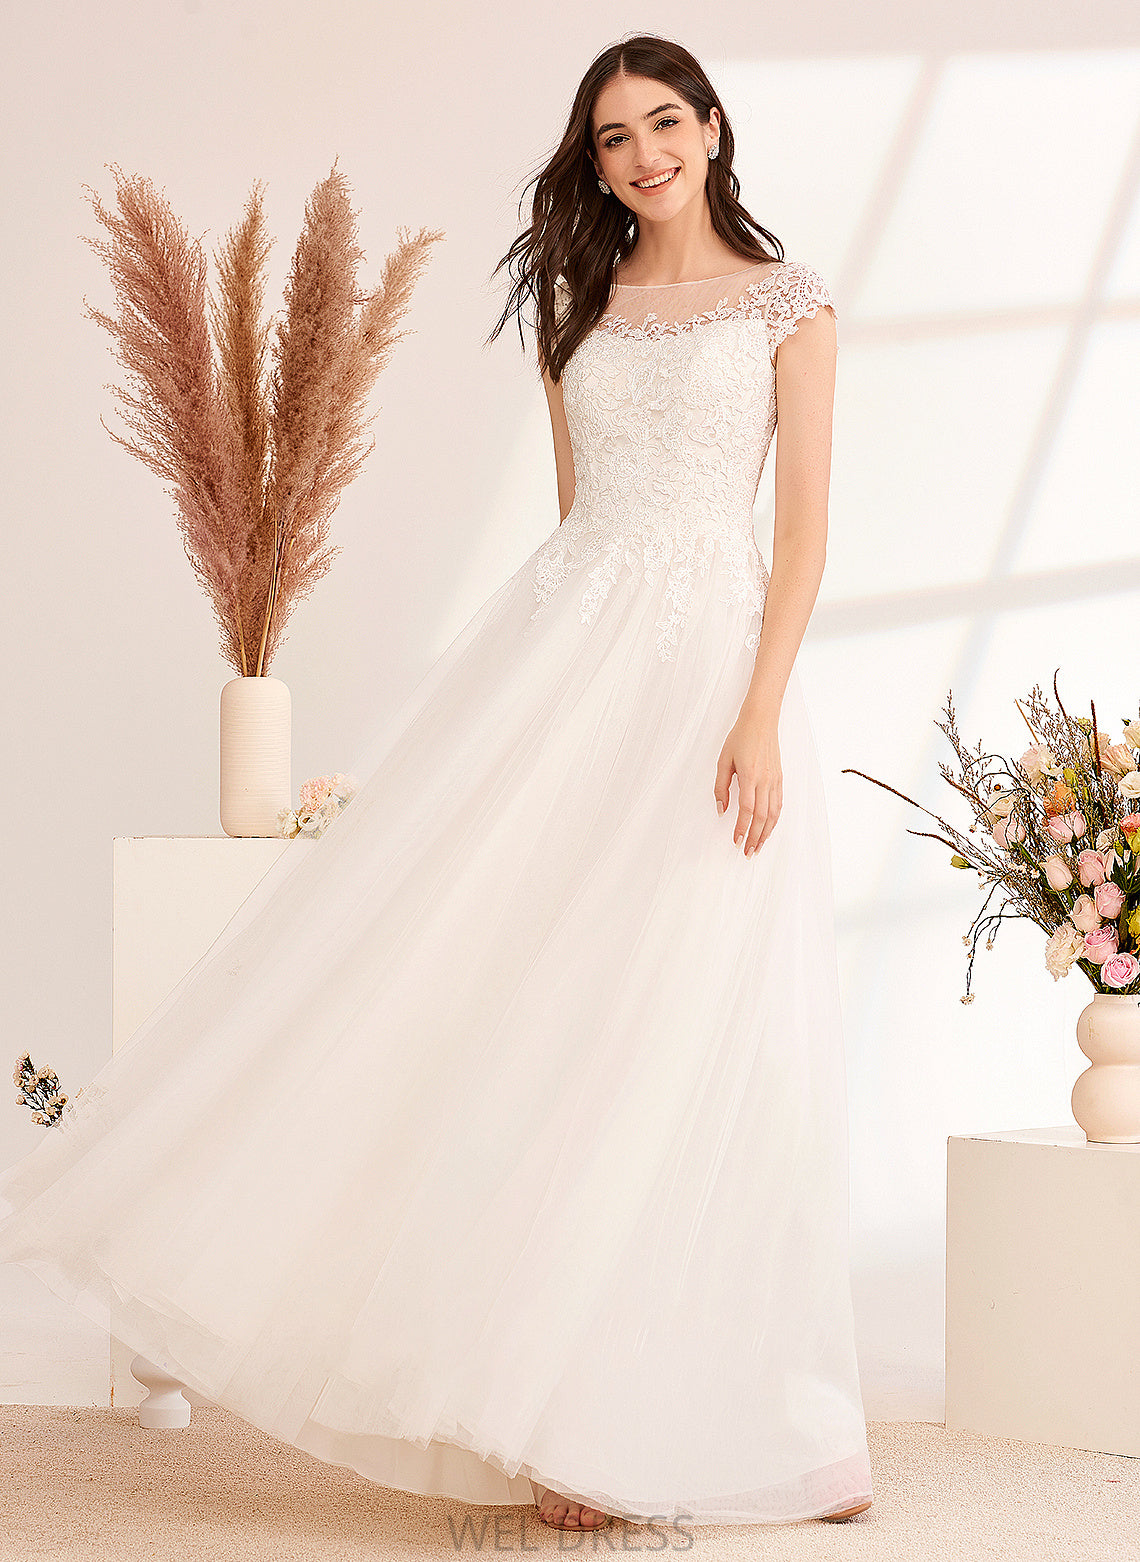 Ball-Gown/Princess Wedding Dresses With Floor-Length Illusion Dress Shelby Lace Wedding